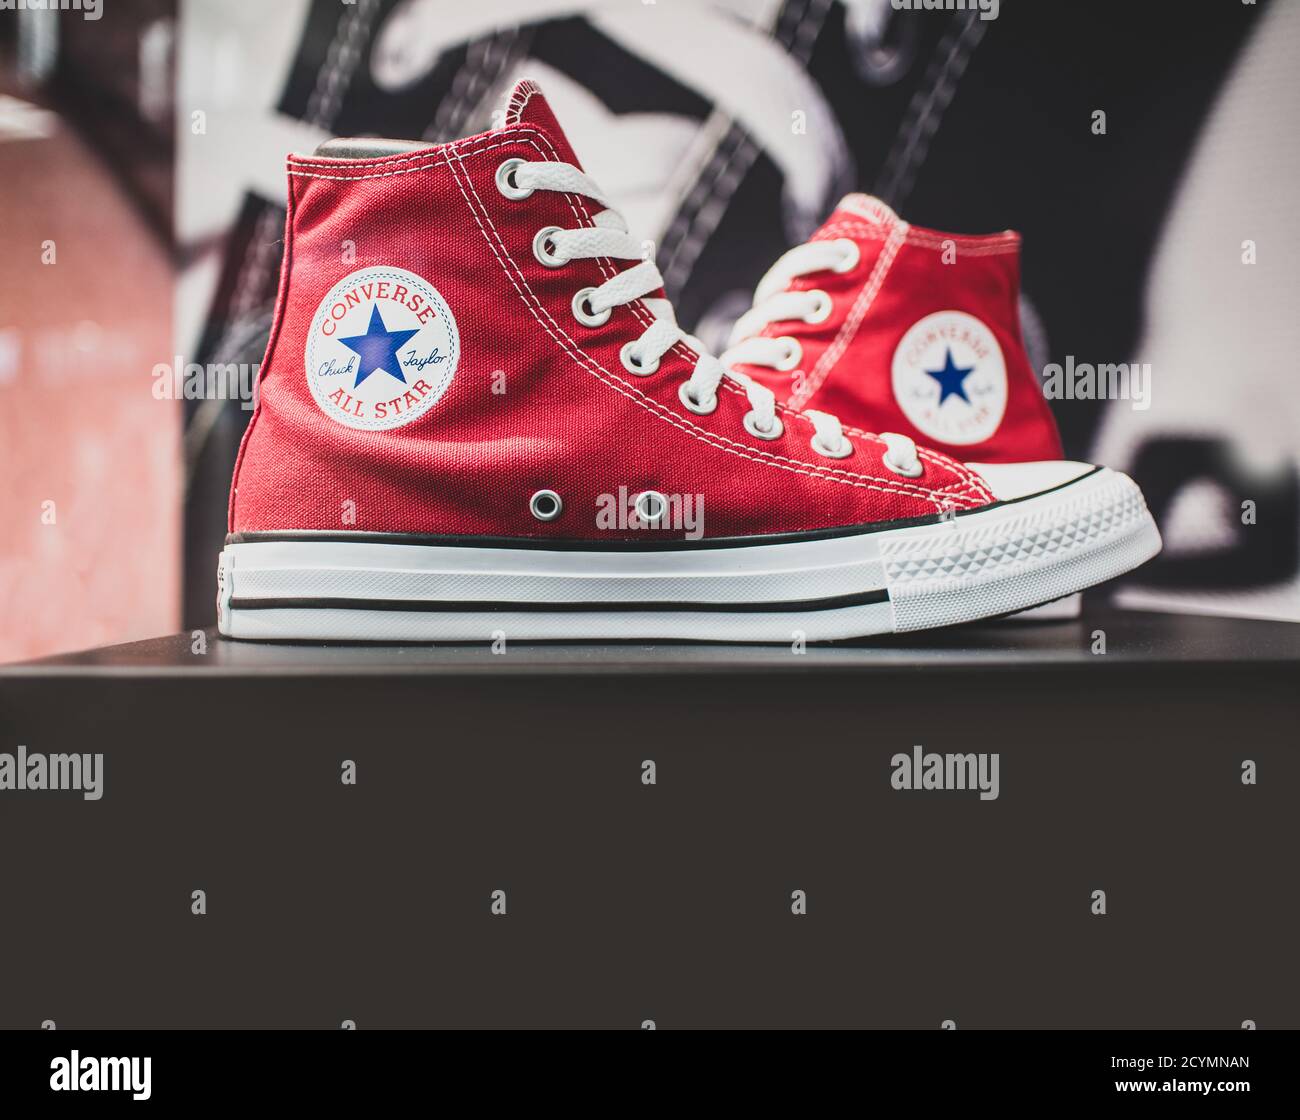 Converse shoes on display. They are an American shoe company that designs  and produces sneakers that are cool, grungy popular with the youth culture  Stock Photo - Alamy